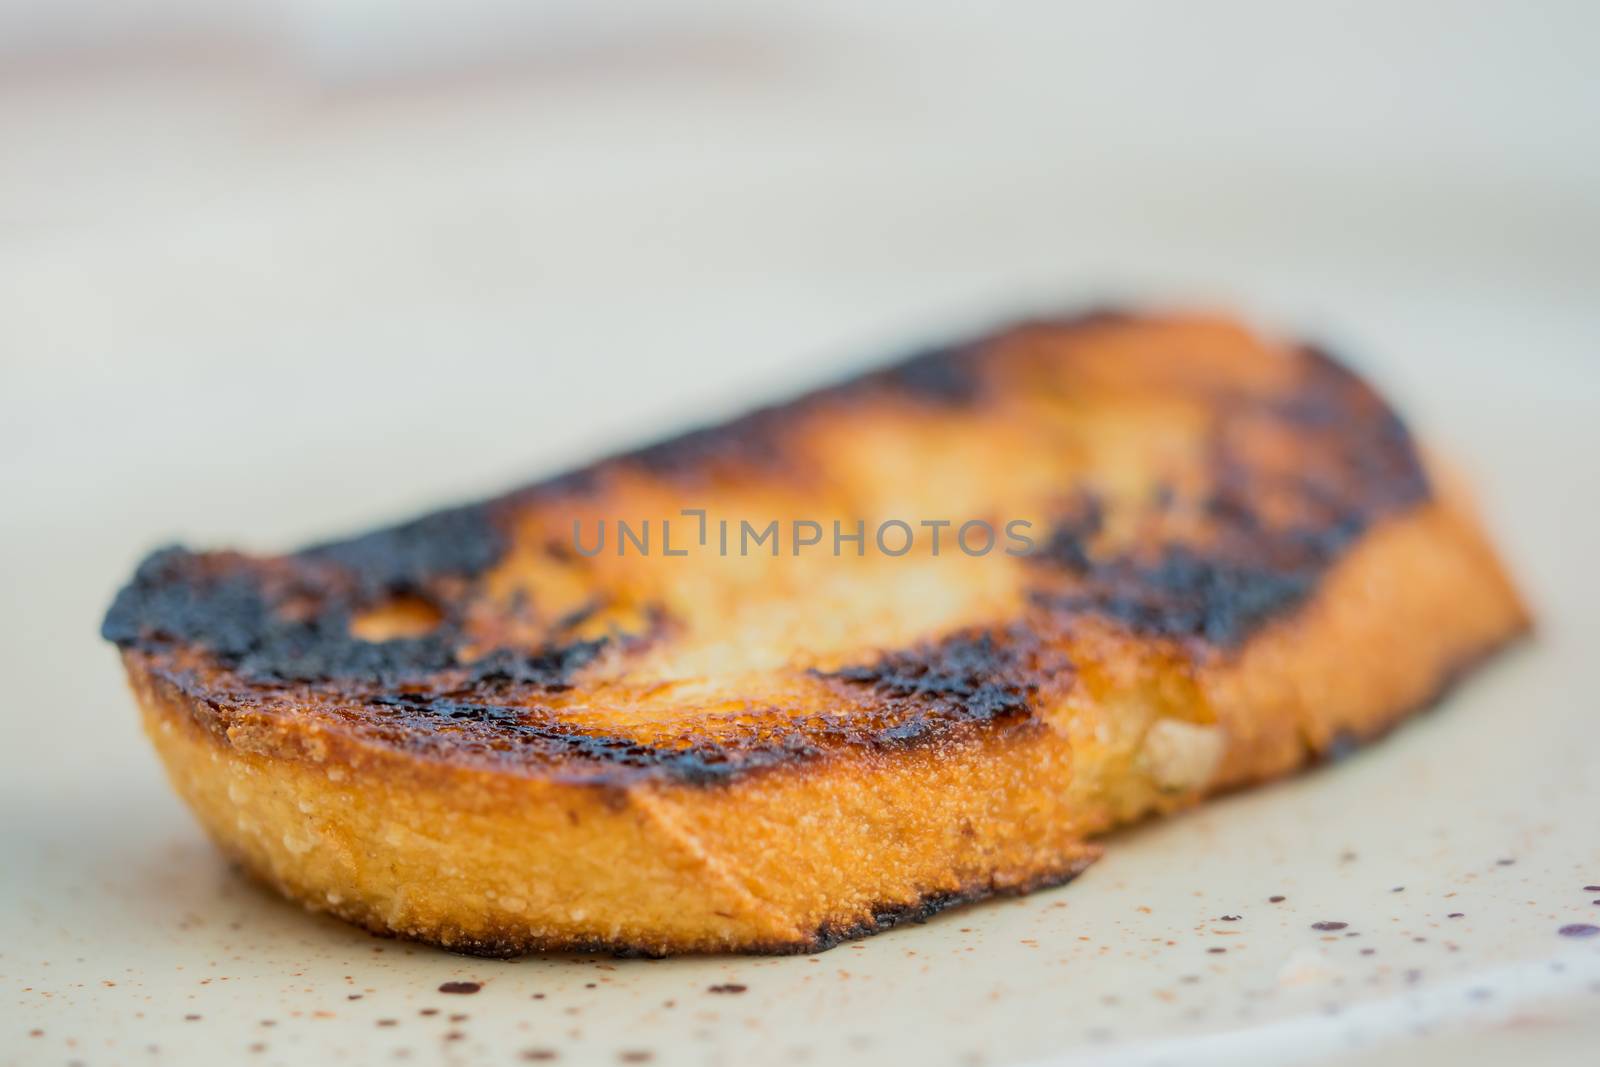 Toasted slice of white bread from the grill by sandra_fotodesign